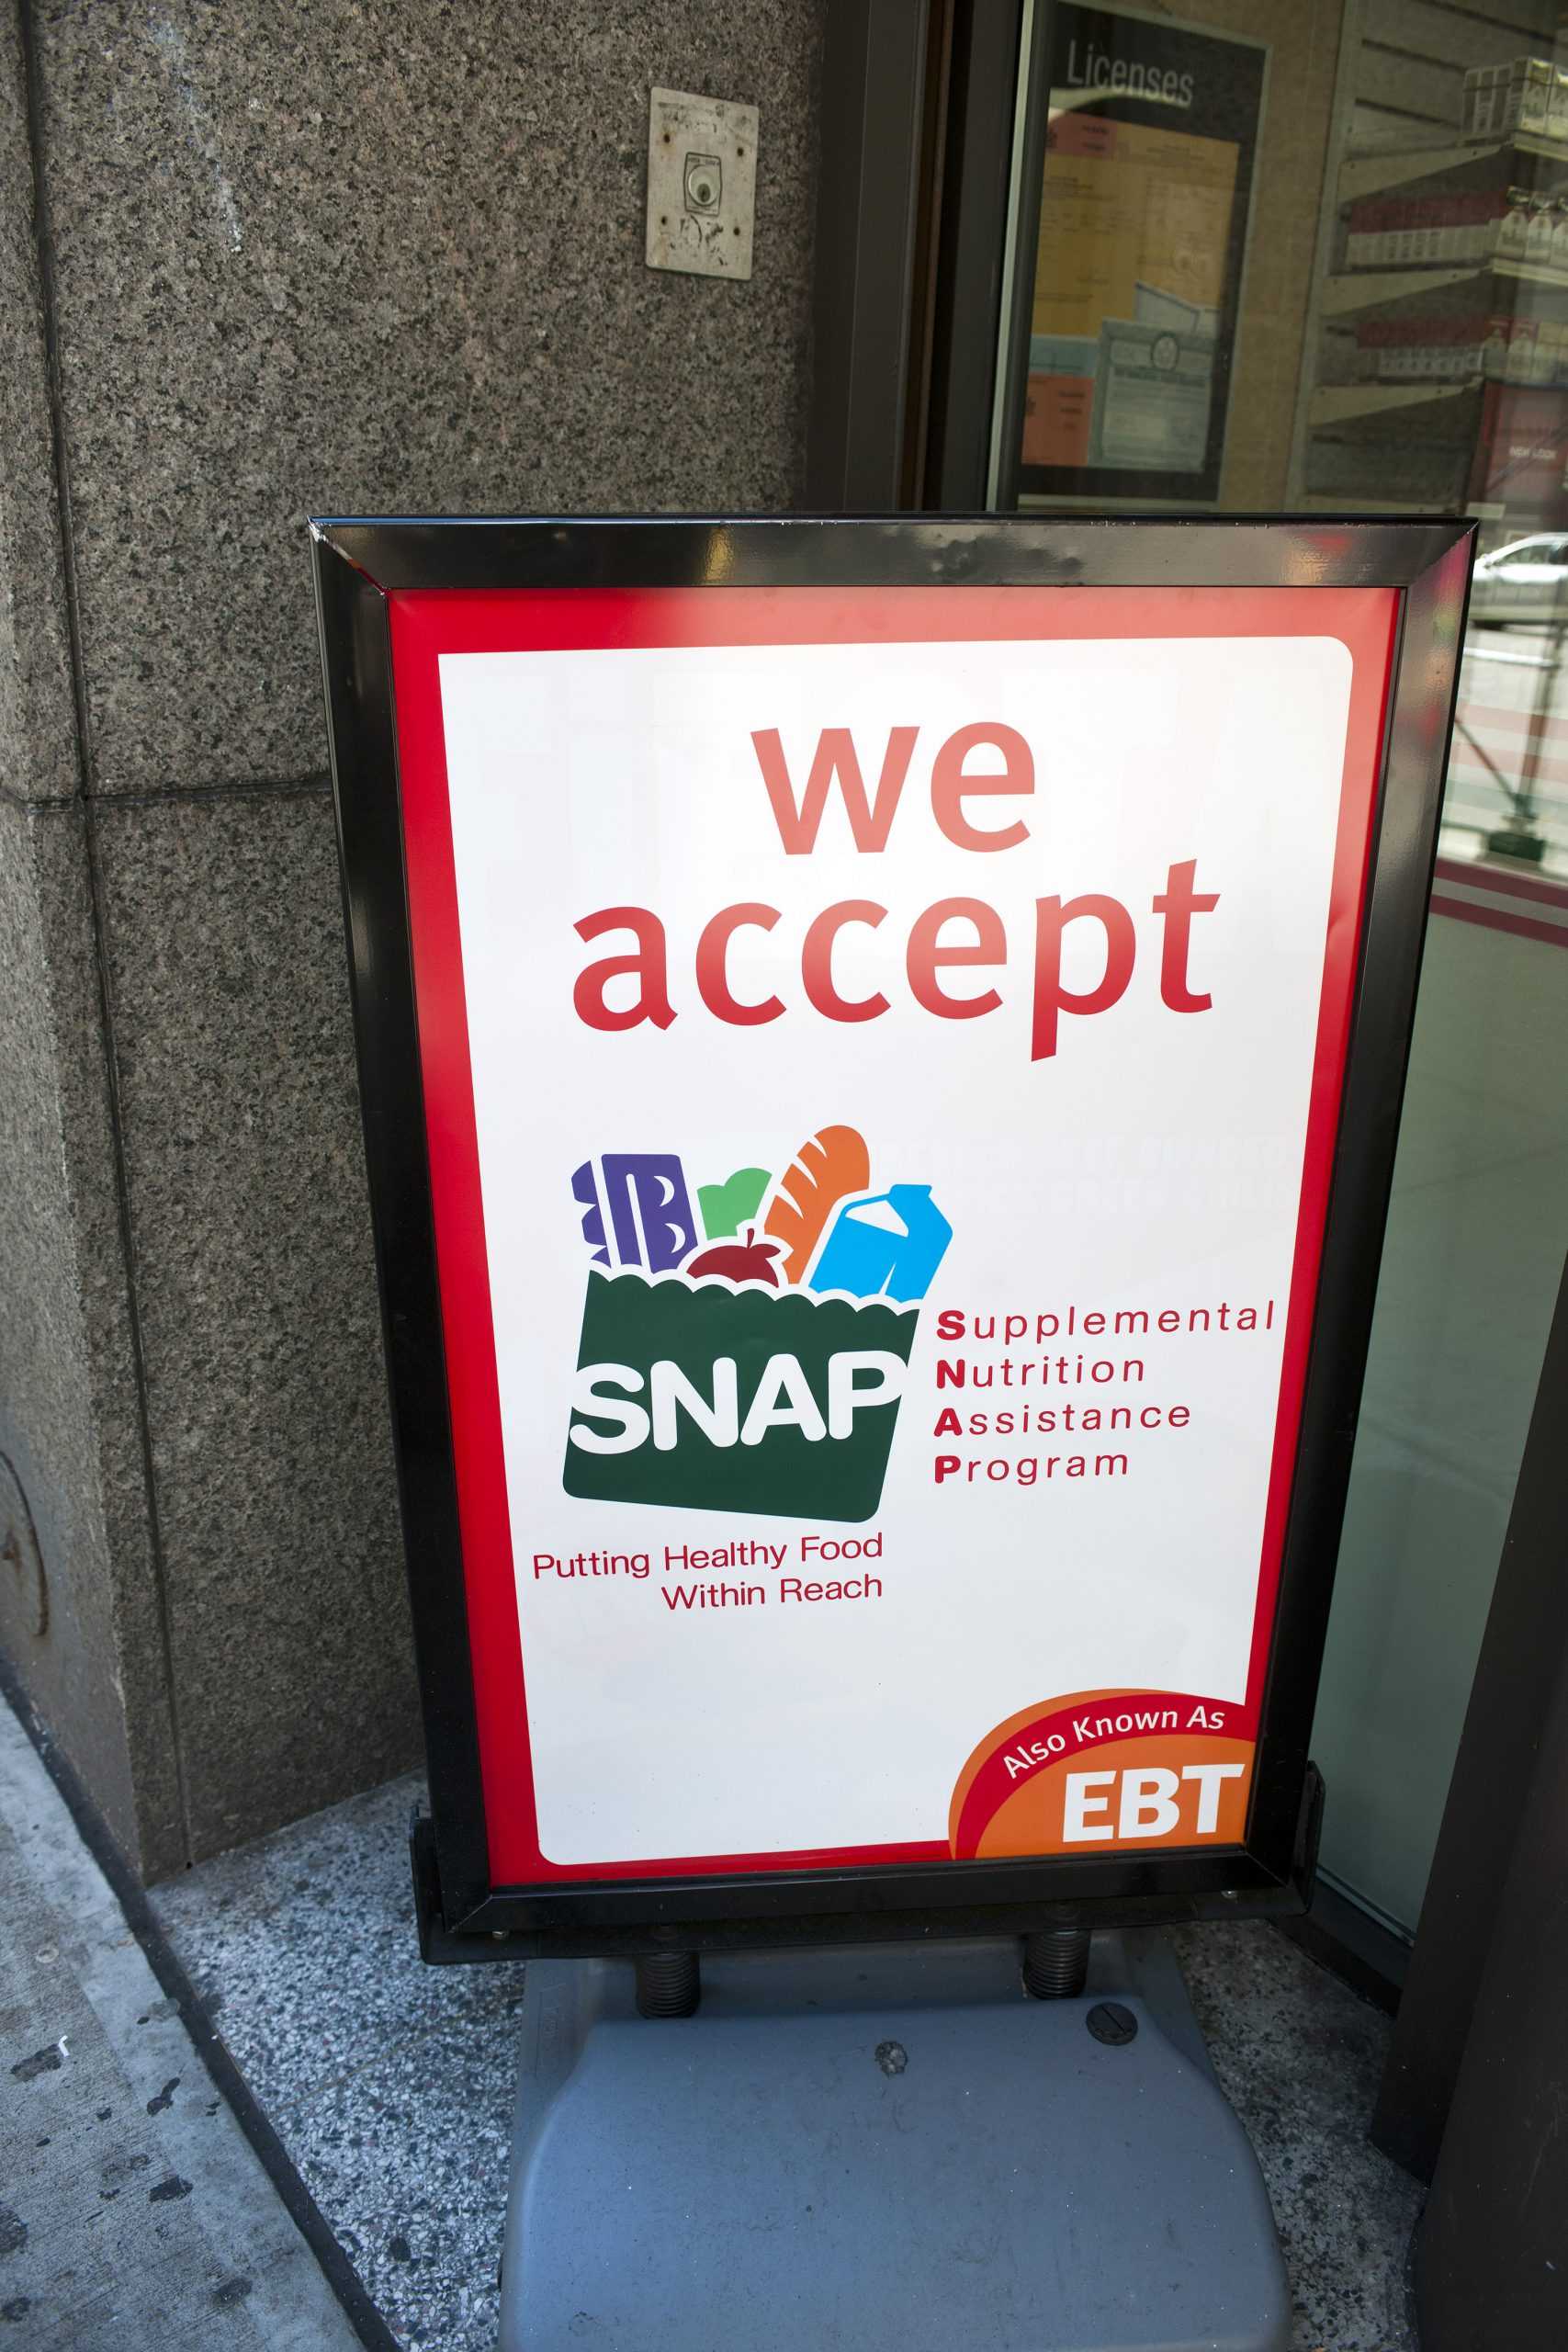 A sign in front of a 7-Eleven in New York announces that the convenience store accepts SNAP (Supplemental Nutrition Assistance Program), on October 20, 2012. President Donald Trump has called for replacing half of the food stamp benefits received with a food delivery service tentatively called Americas Harvest Box. (Richard B. Levine/Sipa USA/TNS)